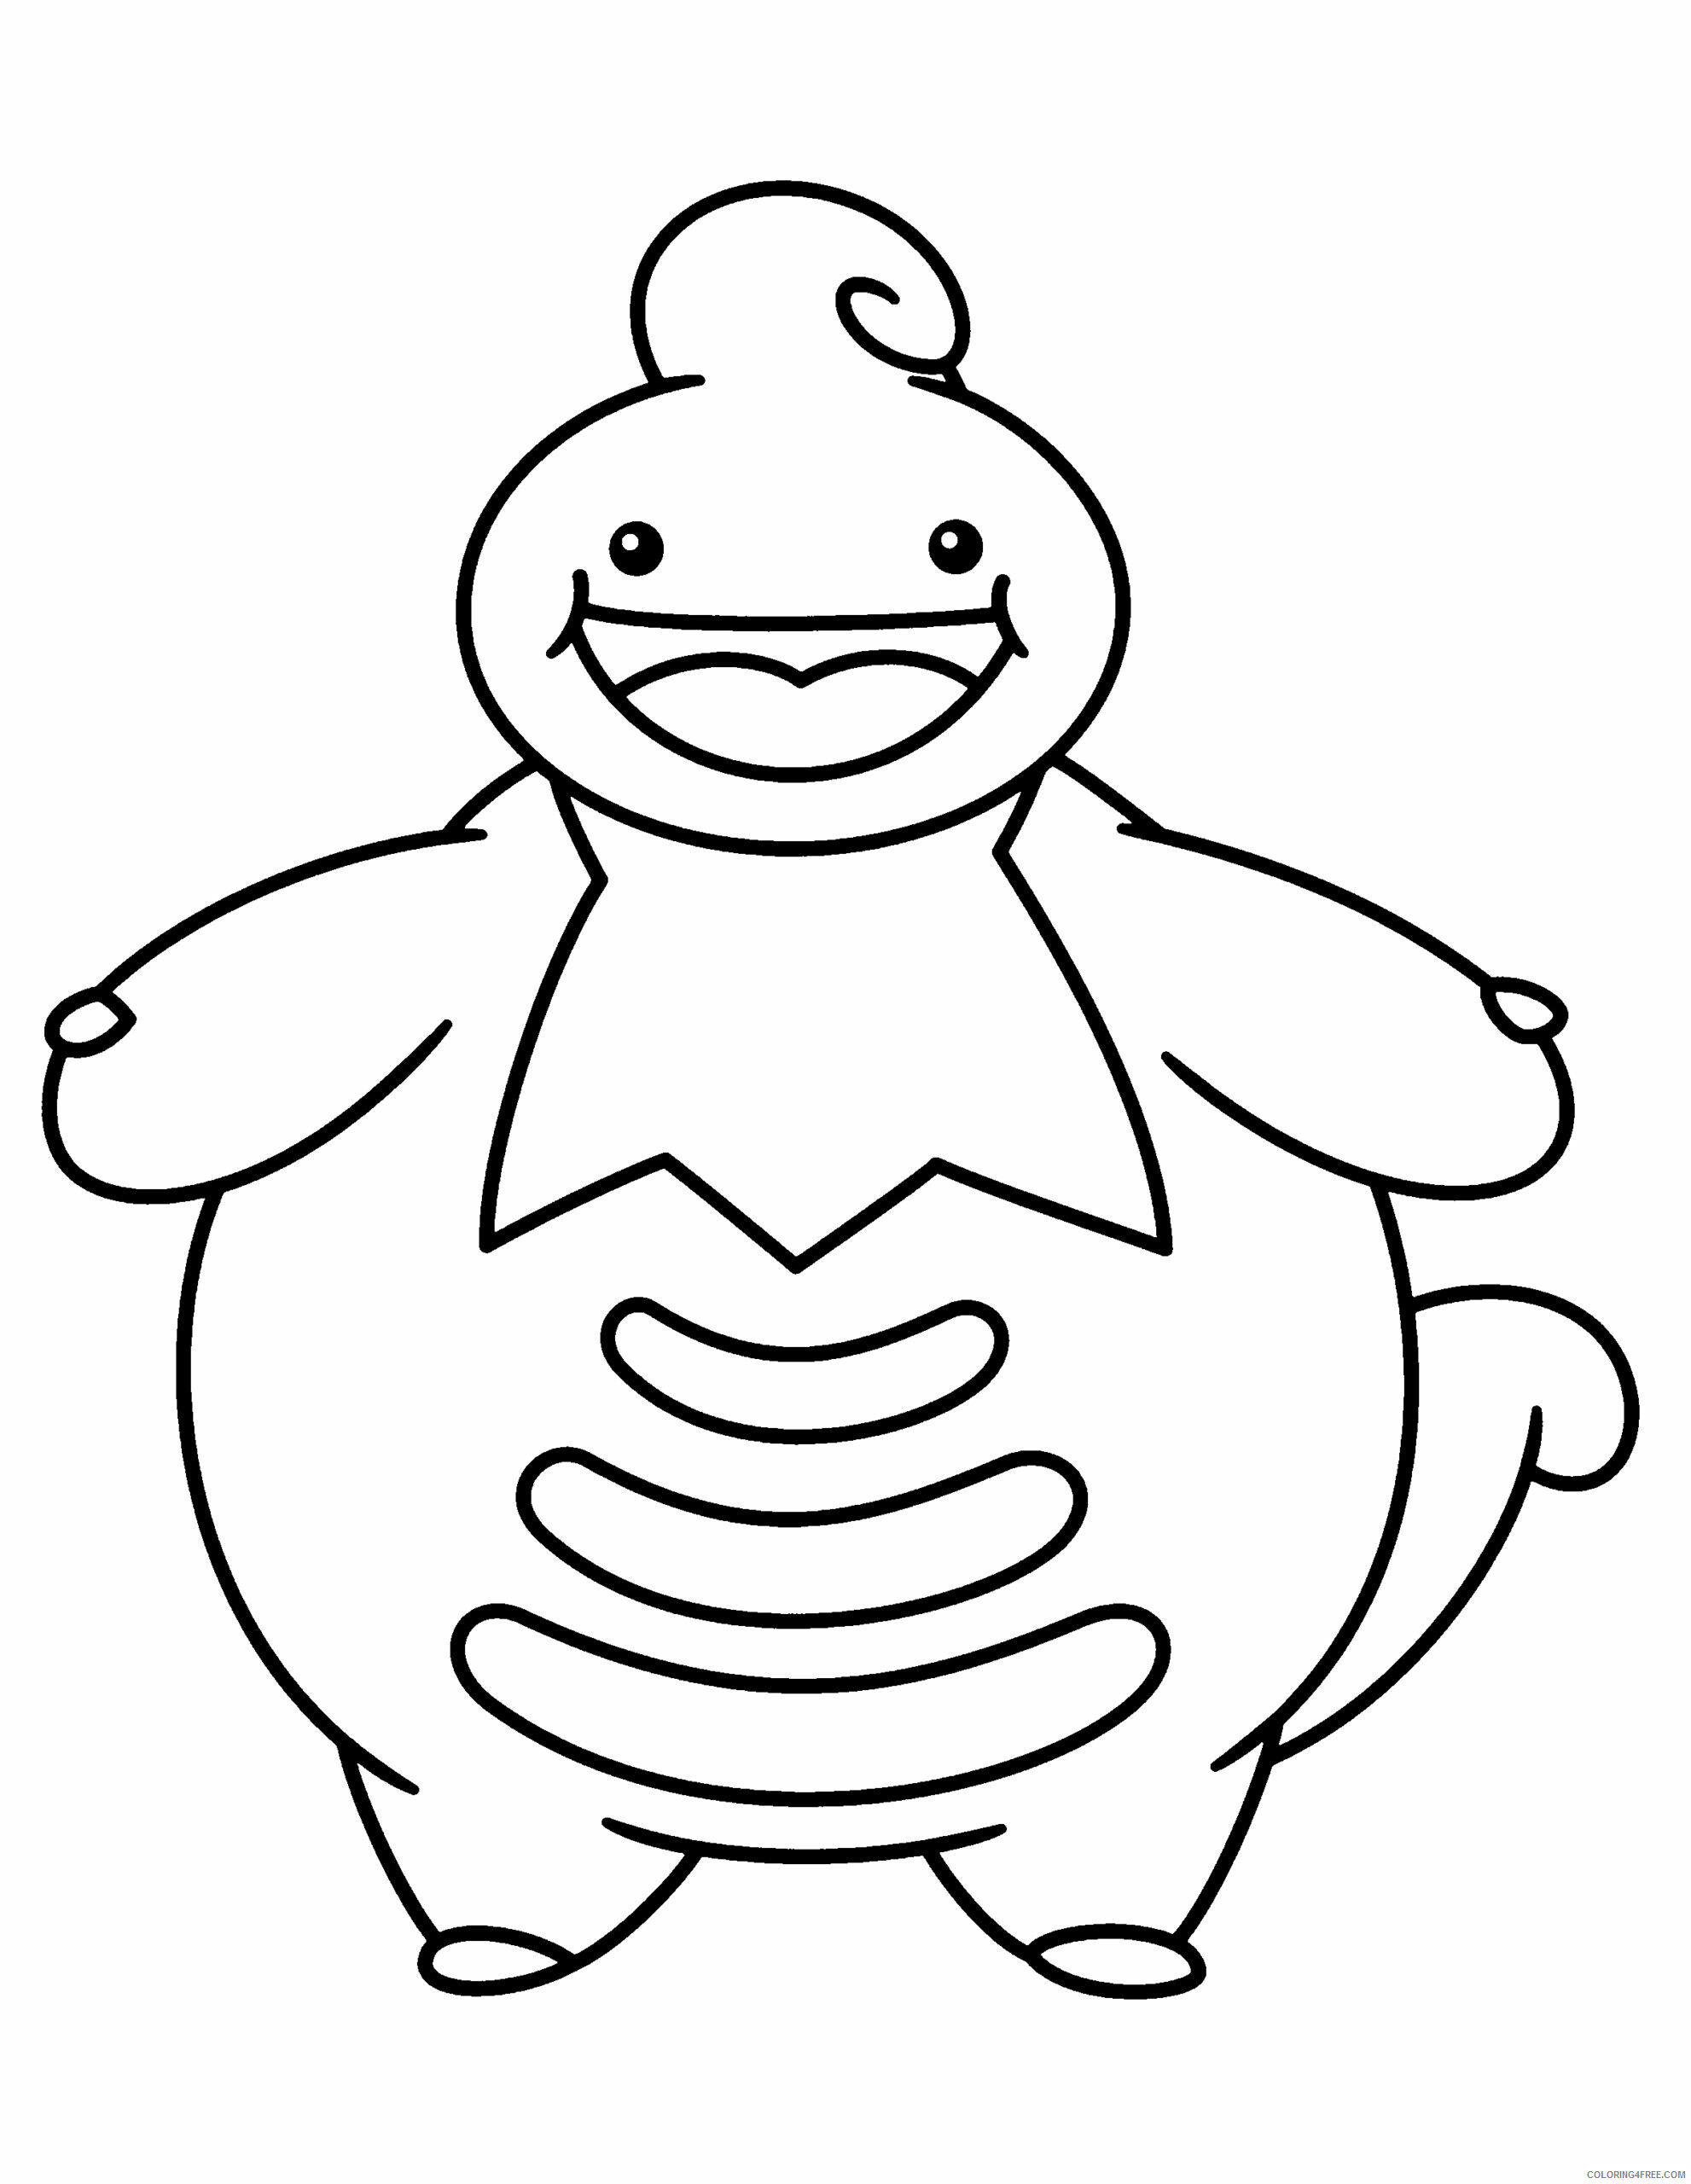 Pokemon Diamond and Pearl Coloring Pages Games Printable 2021 0862 Coloring4free